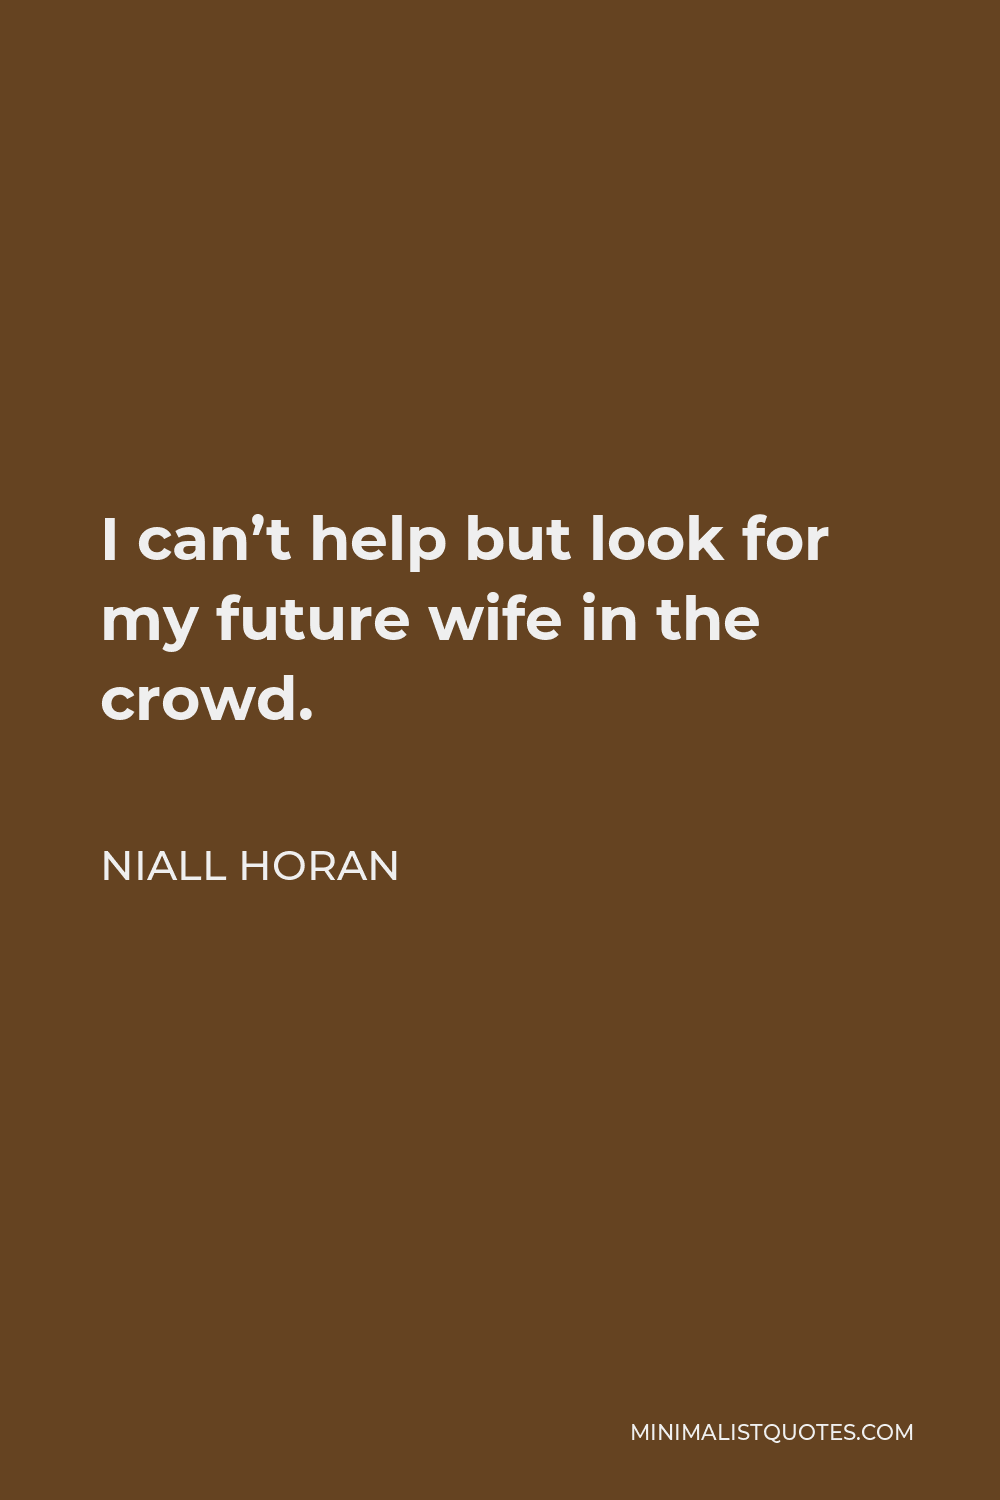 Niall Horan Quote - I can’t help but look for my future wife in the crowd.